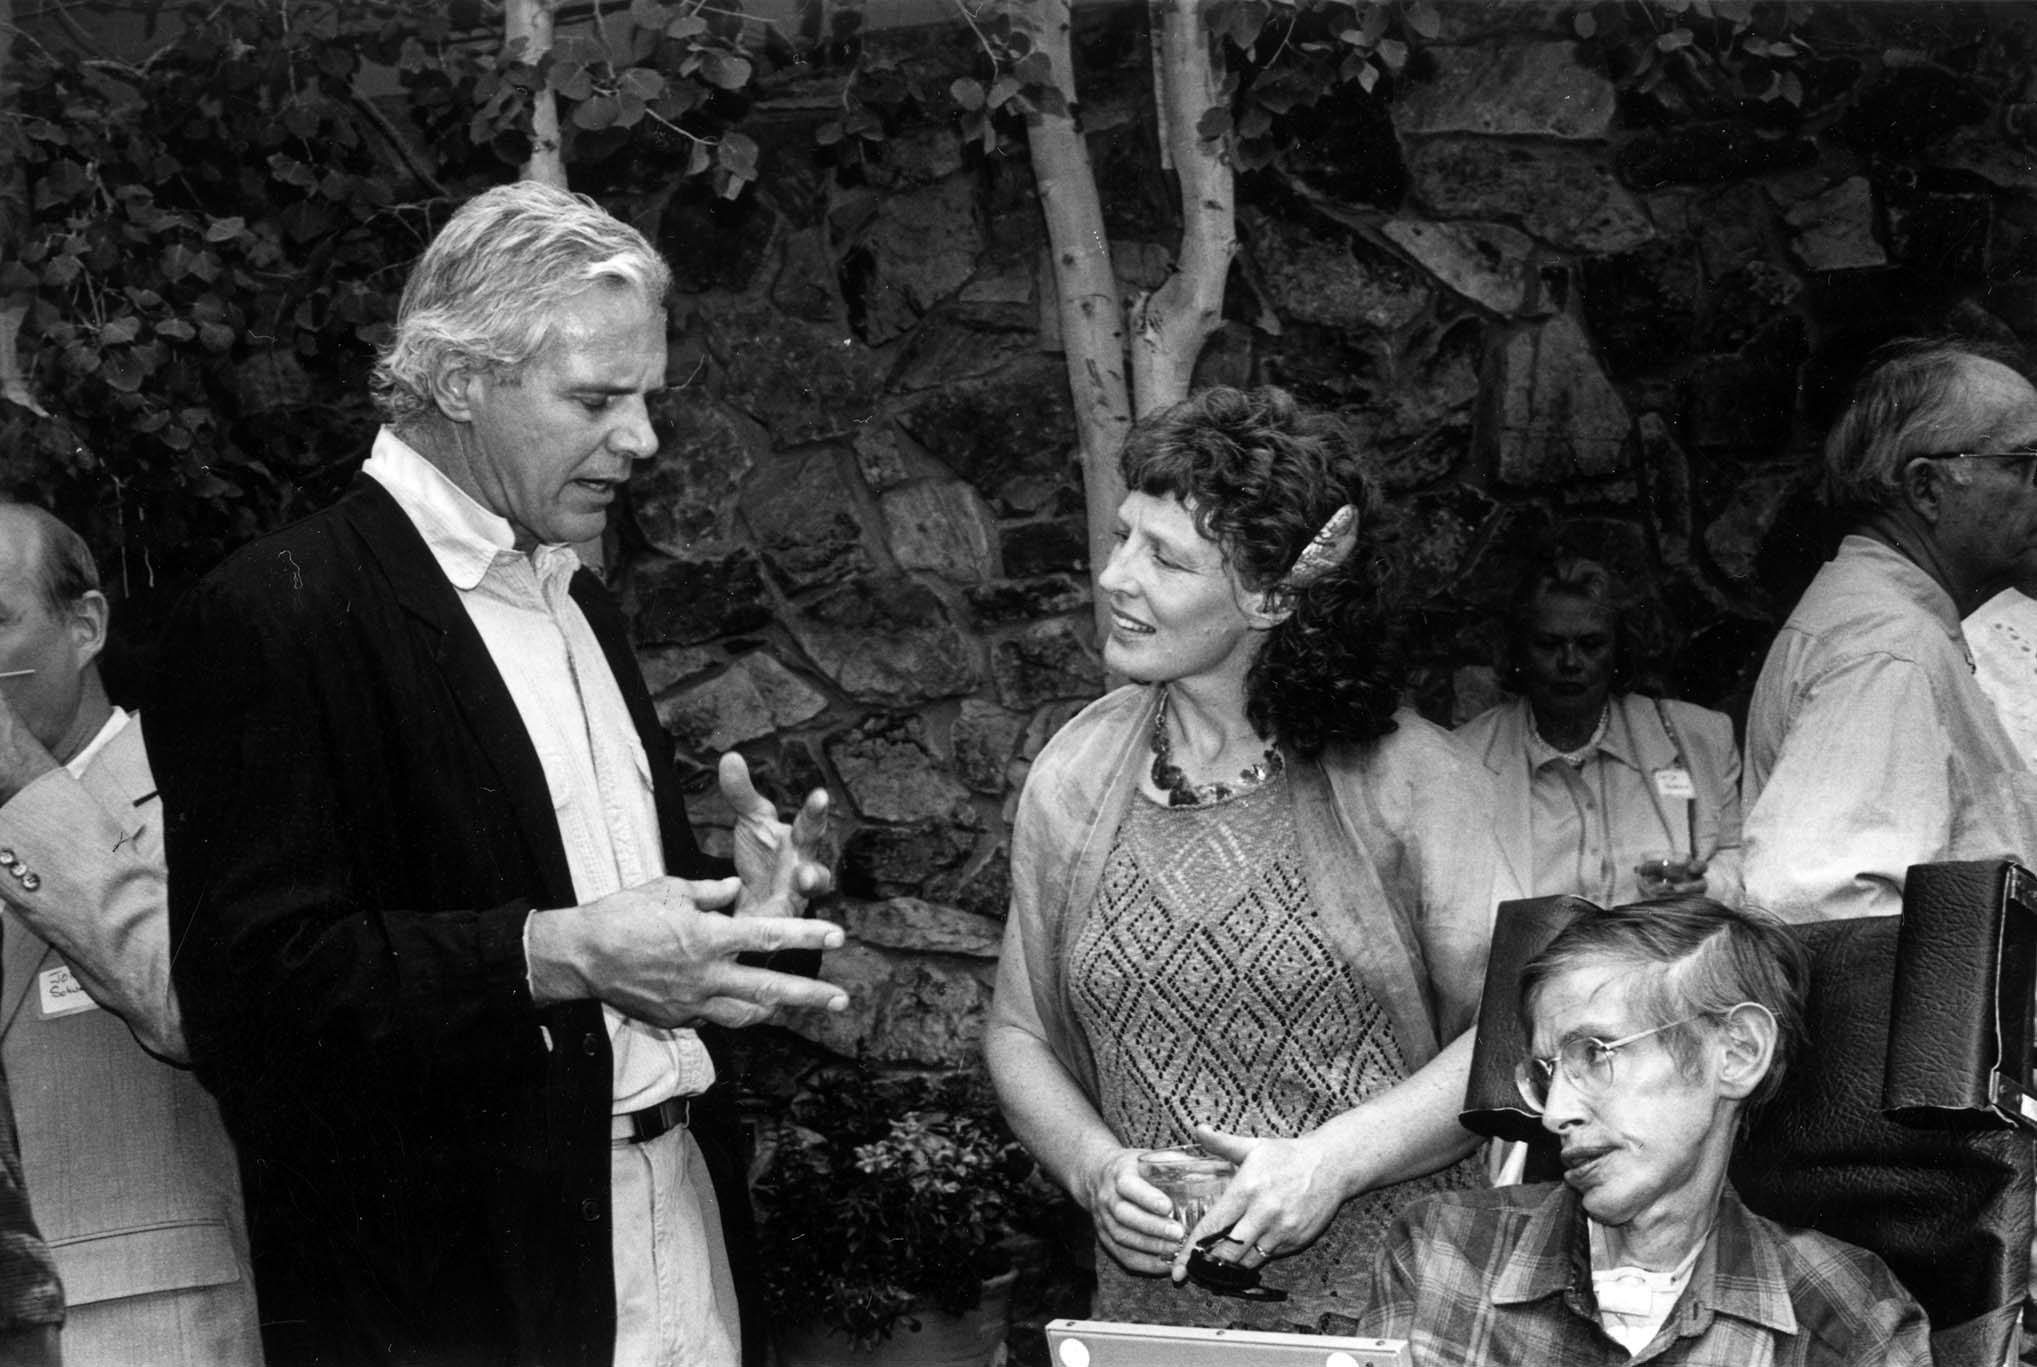 Photograph of Basalt architect Harry Teague, Elaine Mason (wife of Stephen Hawking), and Dr. Stephen Hawking at an Aspen Center for Physics event honoring Dr. Hawking, July 1995. Photo courtesy of Aspen Historical Society.